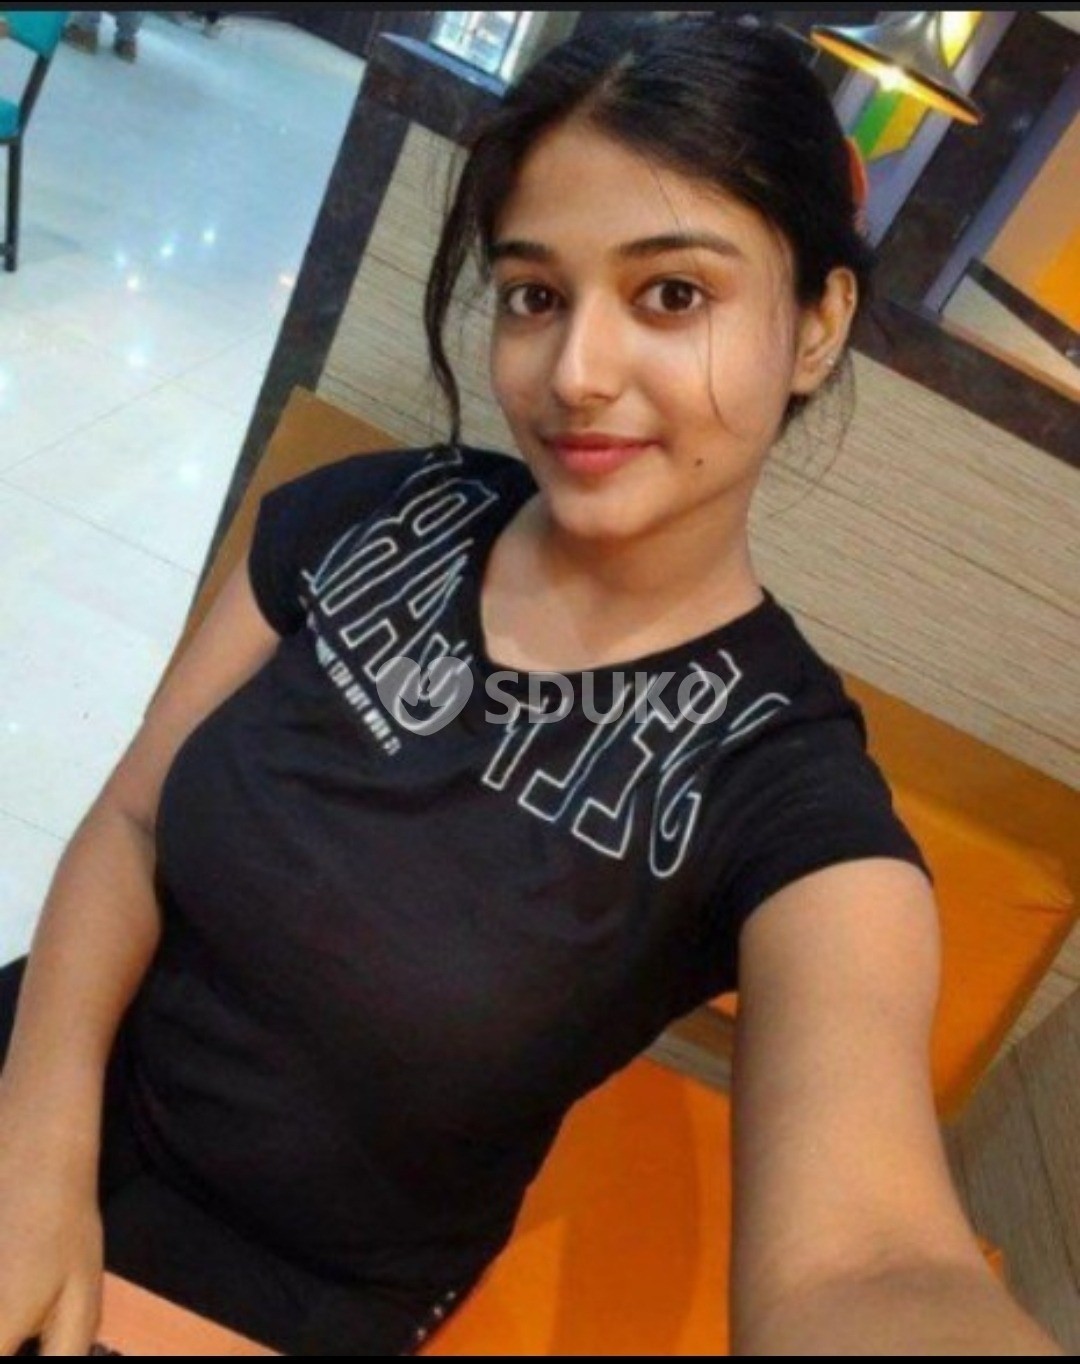 MY SELF DIVYA UNLIMITED SEX CUTE BEST SERVICE AND 24 HR AVAILABLE.